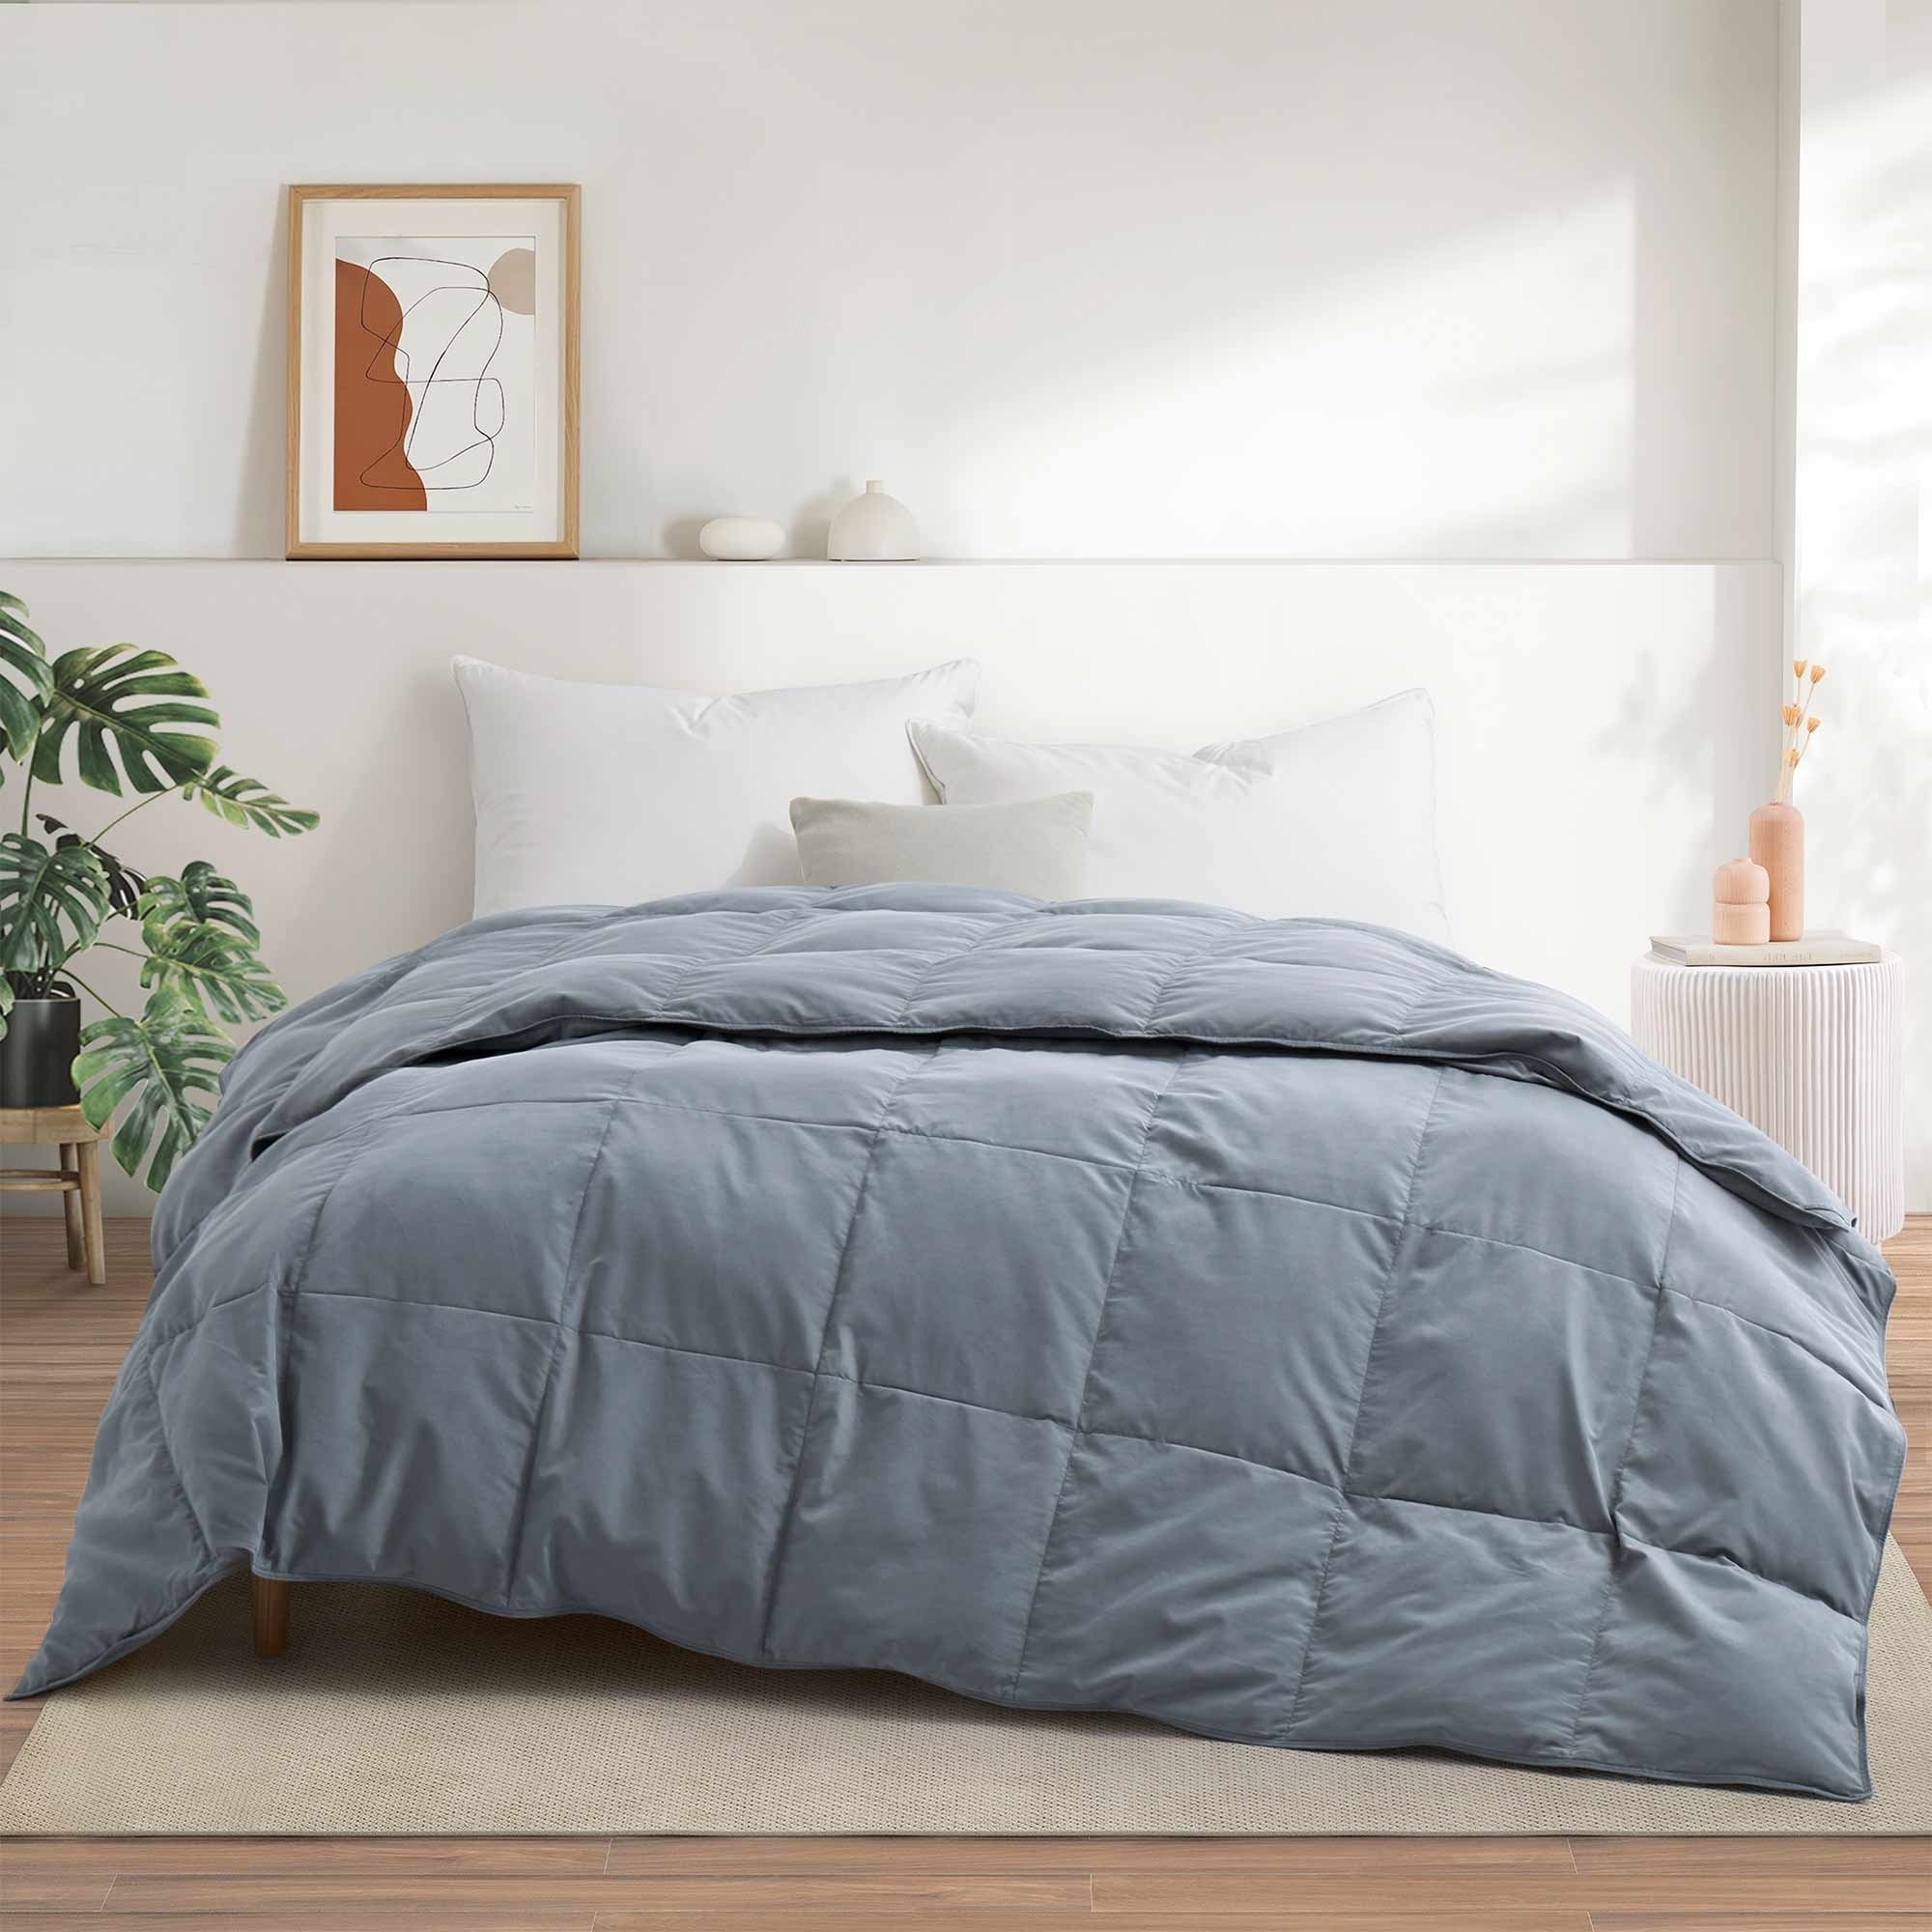 Lightweight Goose Feather And Down Comforter- Hotel Collection For Hot Sleepers - Steel Gray, California King